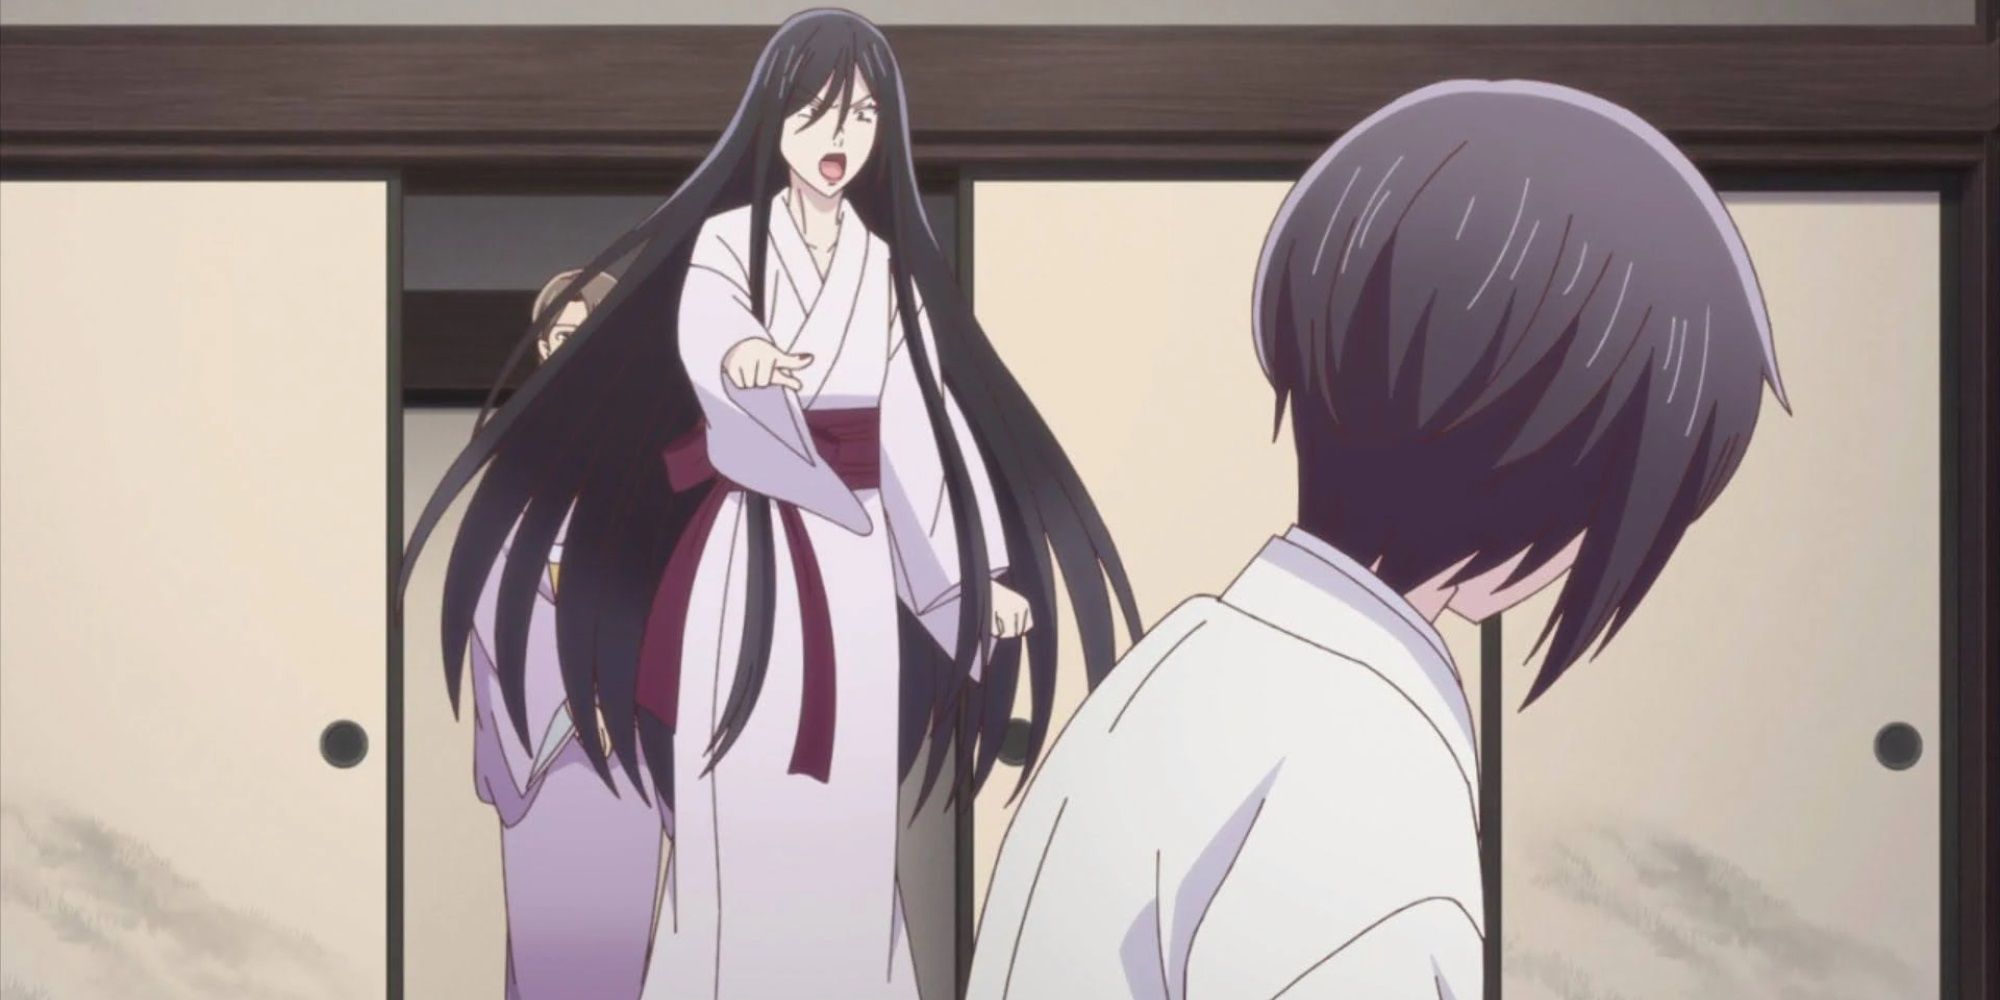 An angry Ren Sohma berating Akito in the 2019 Fruits Basket anime